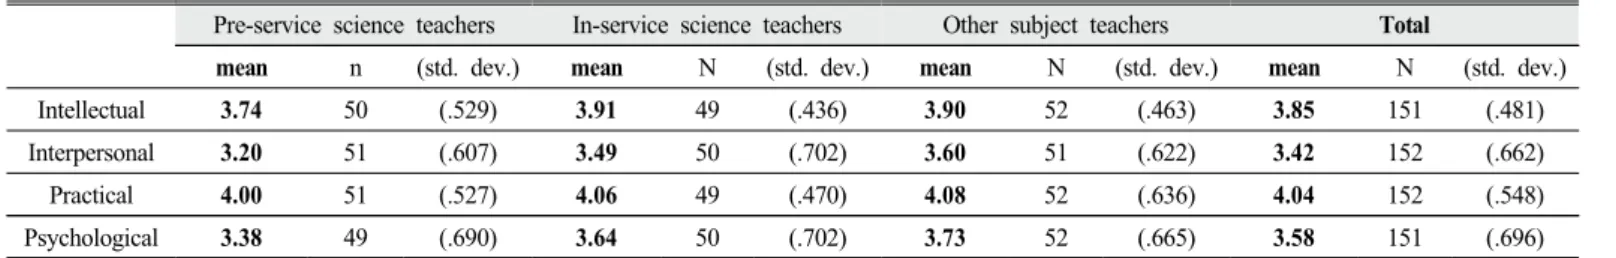 Table 3. Mean value of 4 dimensions of wisdom in each participant group 